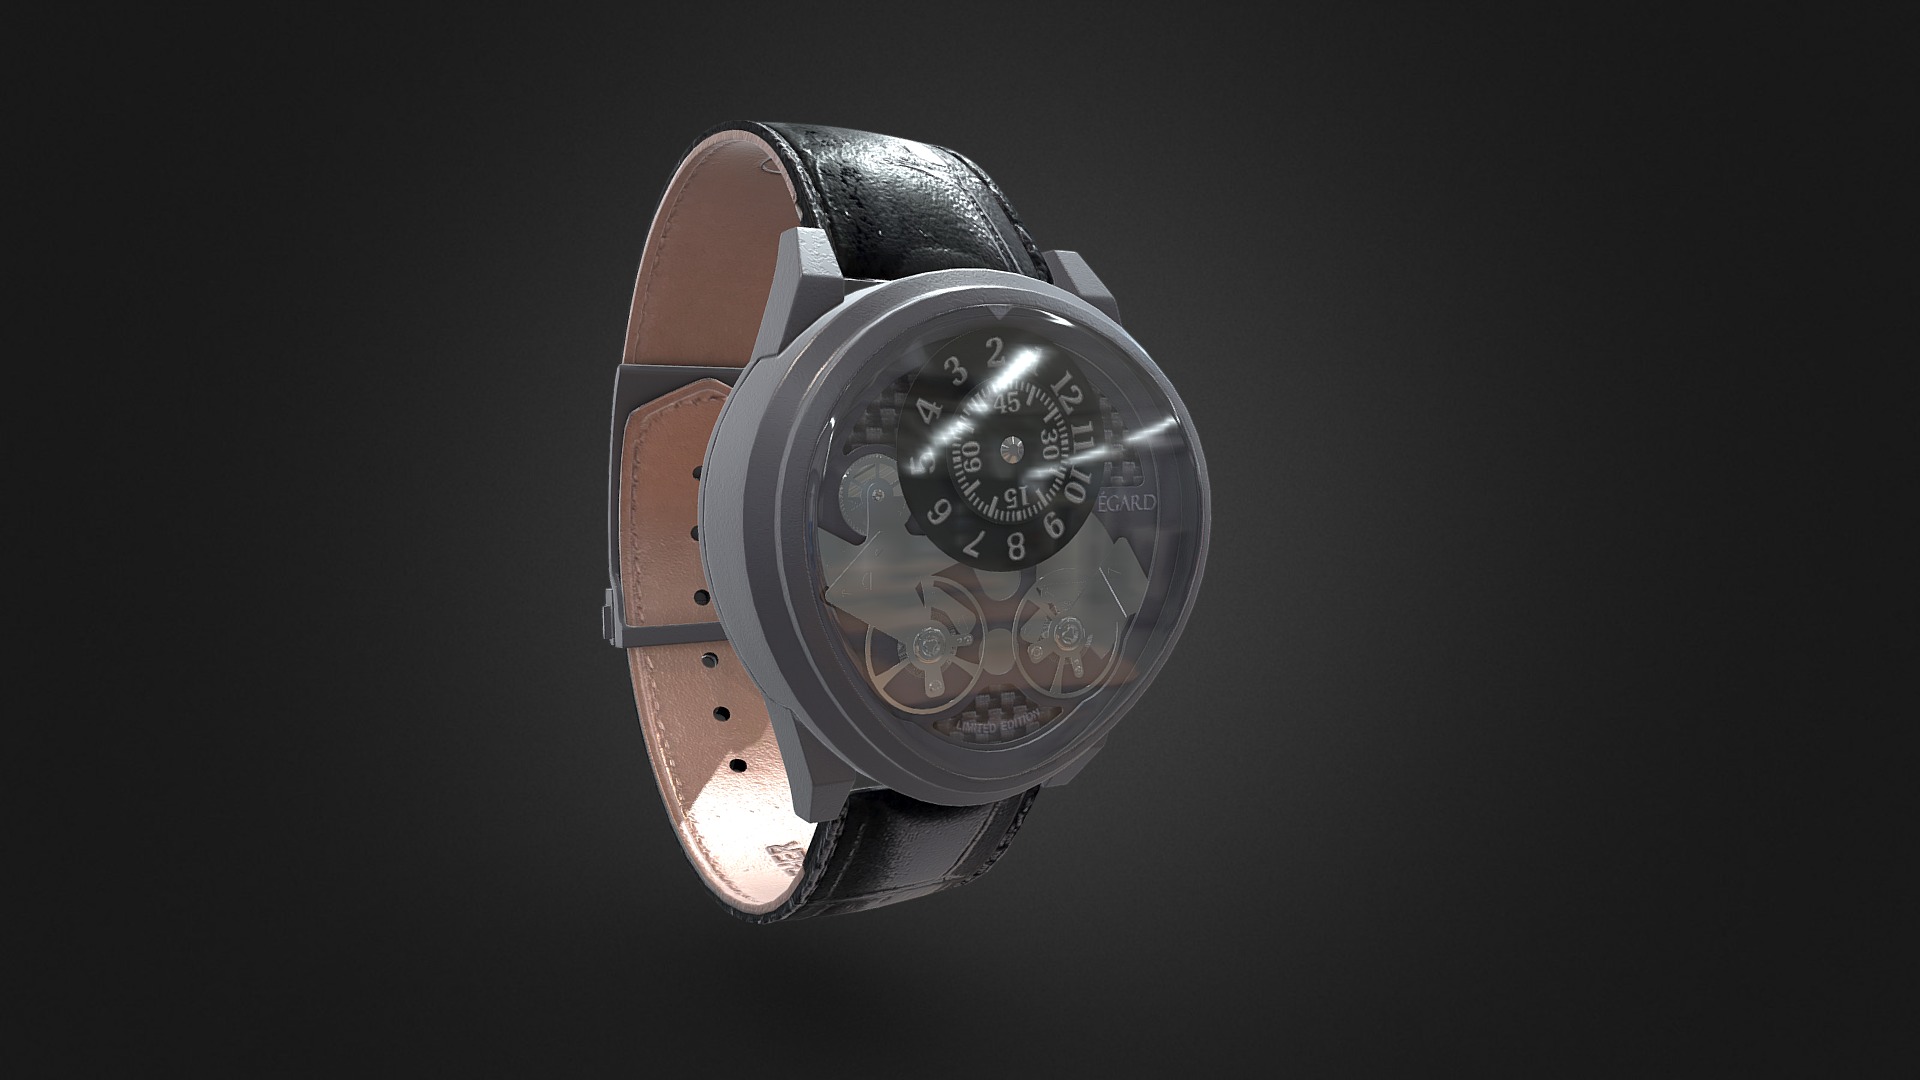 3D model Egard Watches - This is a 3D model of the Egard Watches. The 3D model is about a watch with a leather strap.